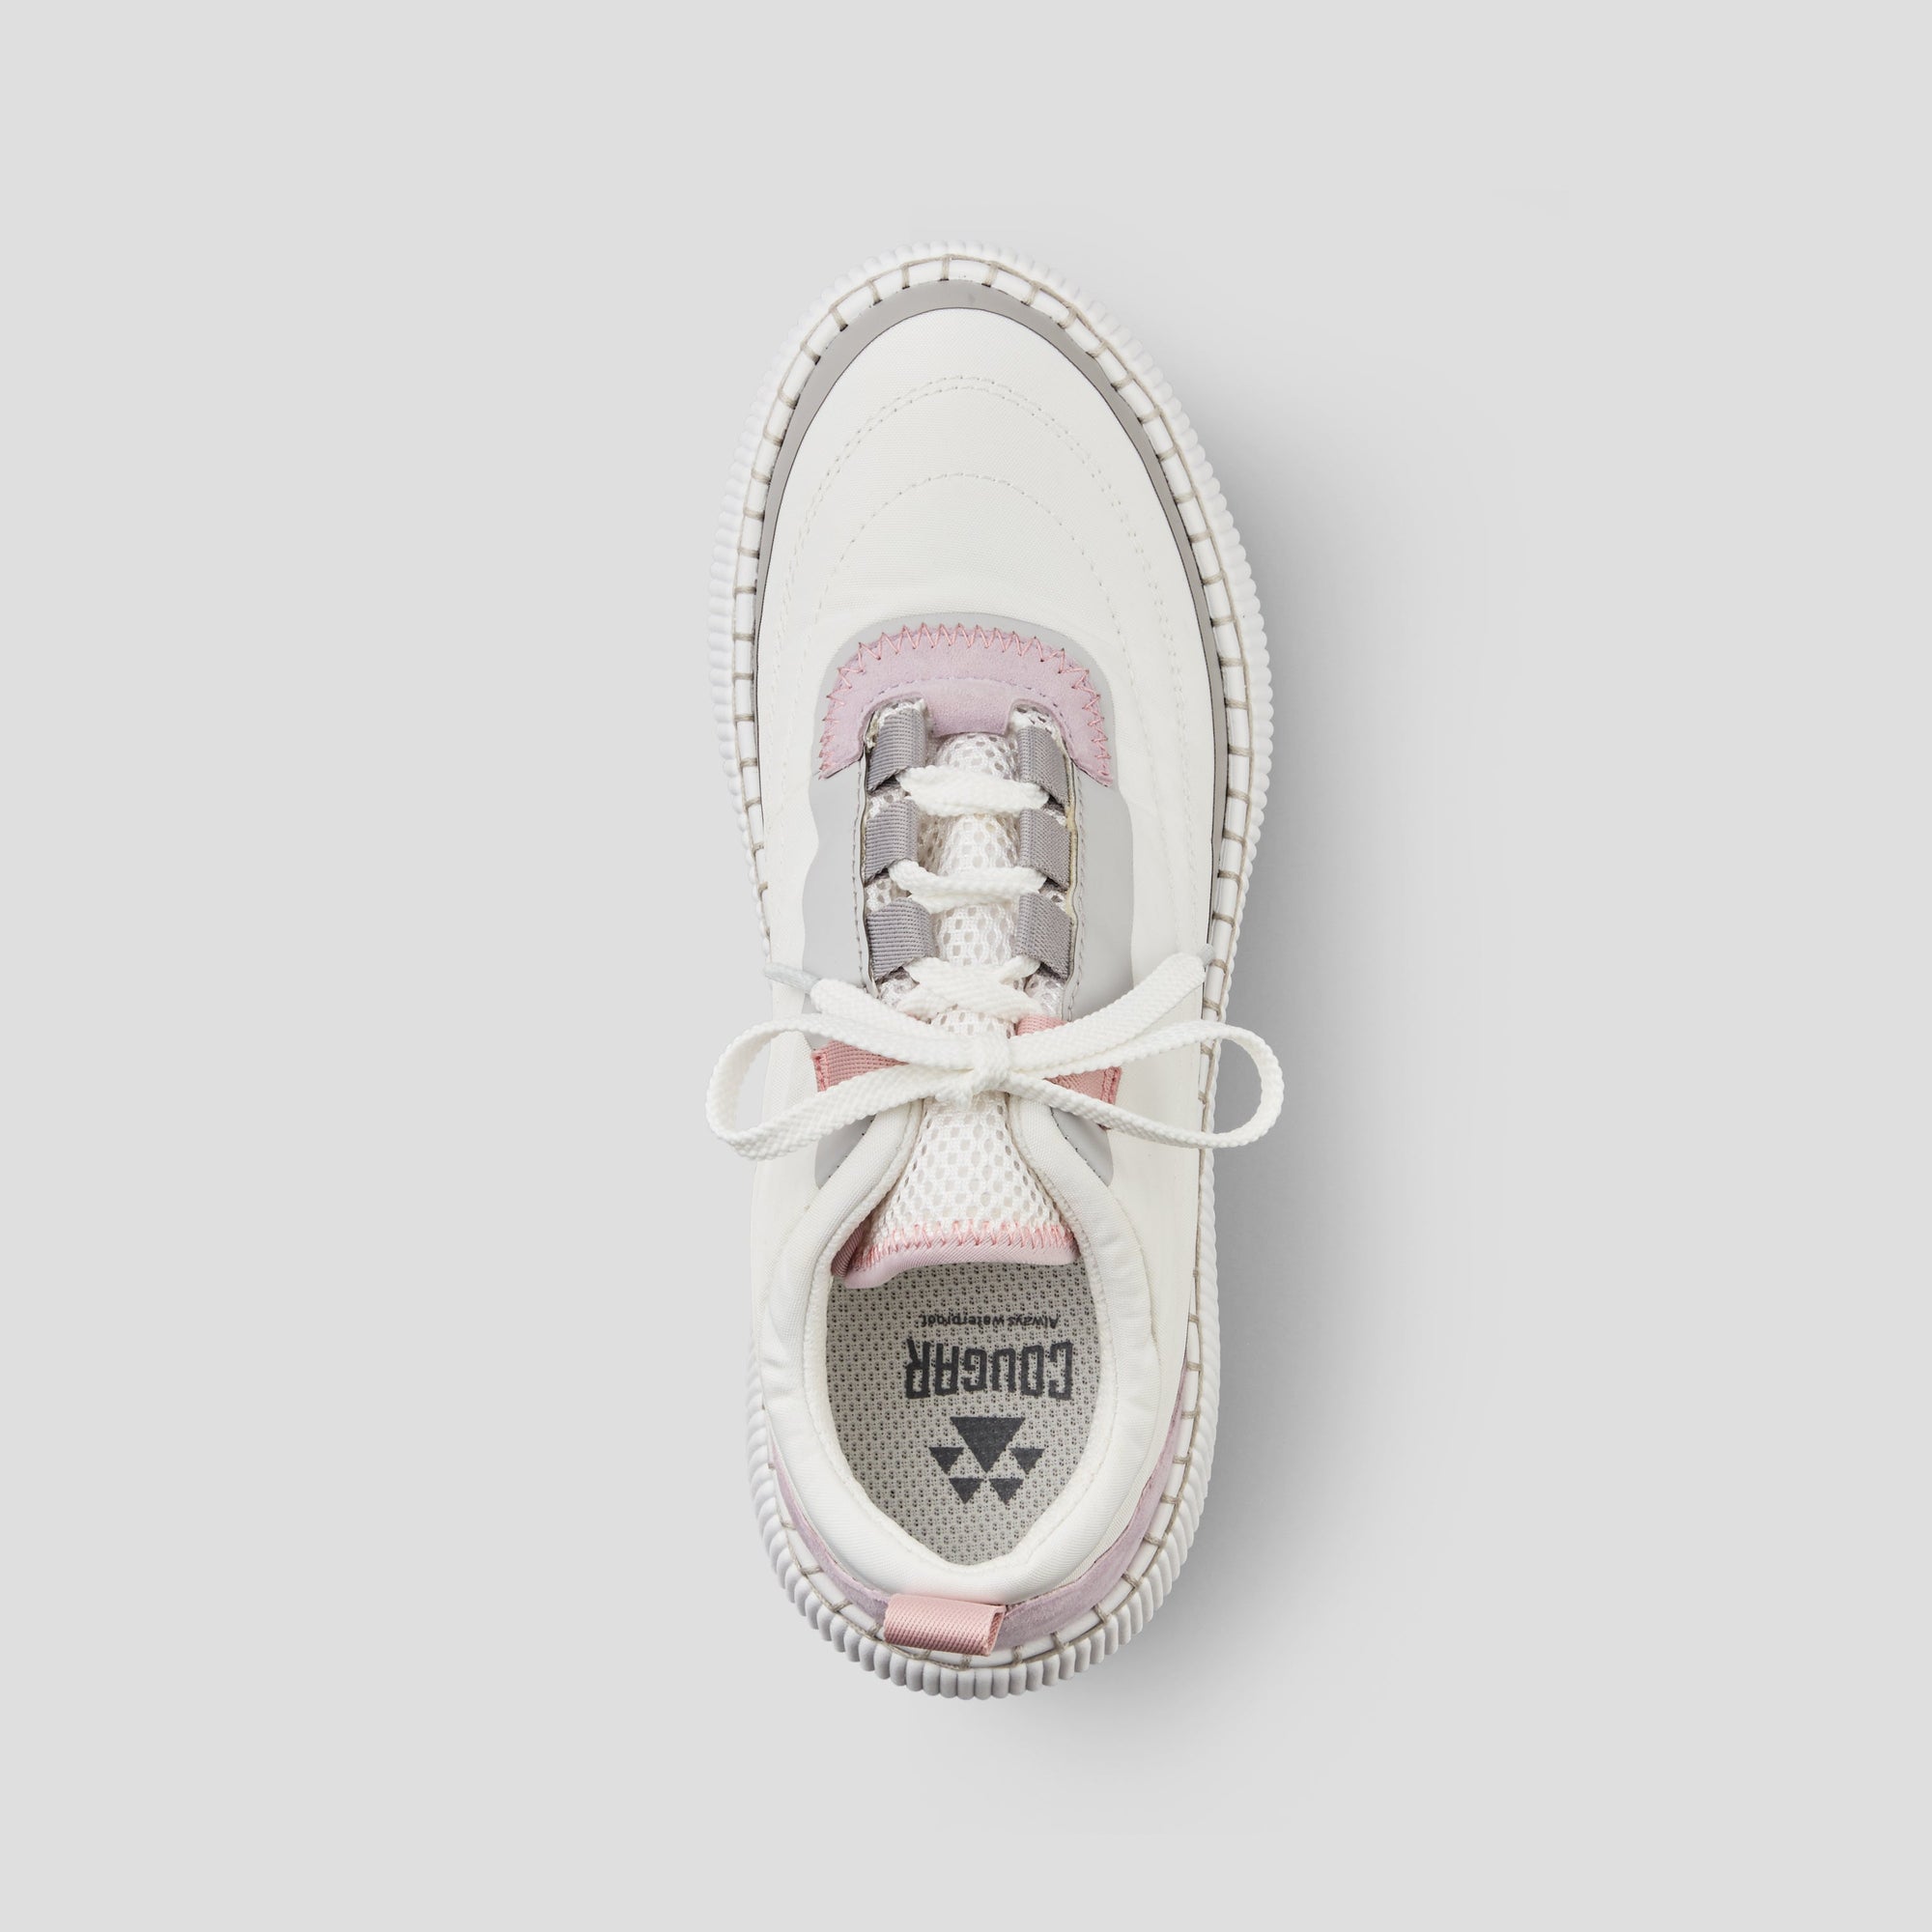 Sayah Luxmotion Nylon and Suede Waterproof Sneaker - Colour White-Lavender